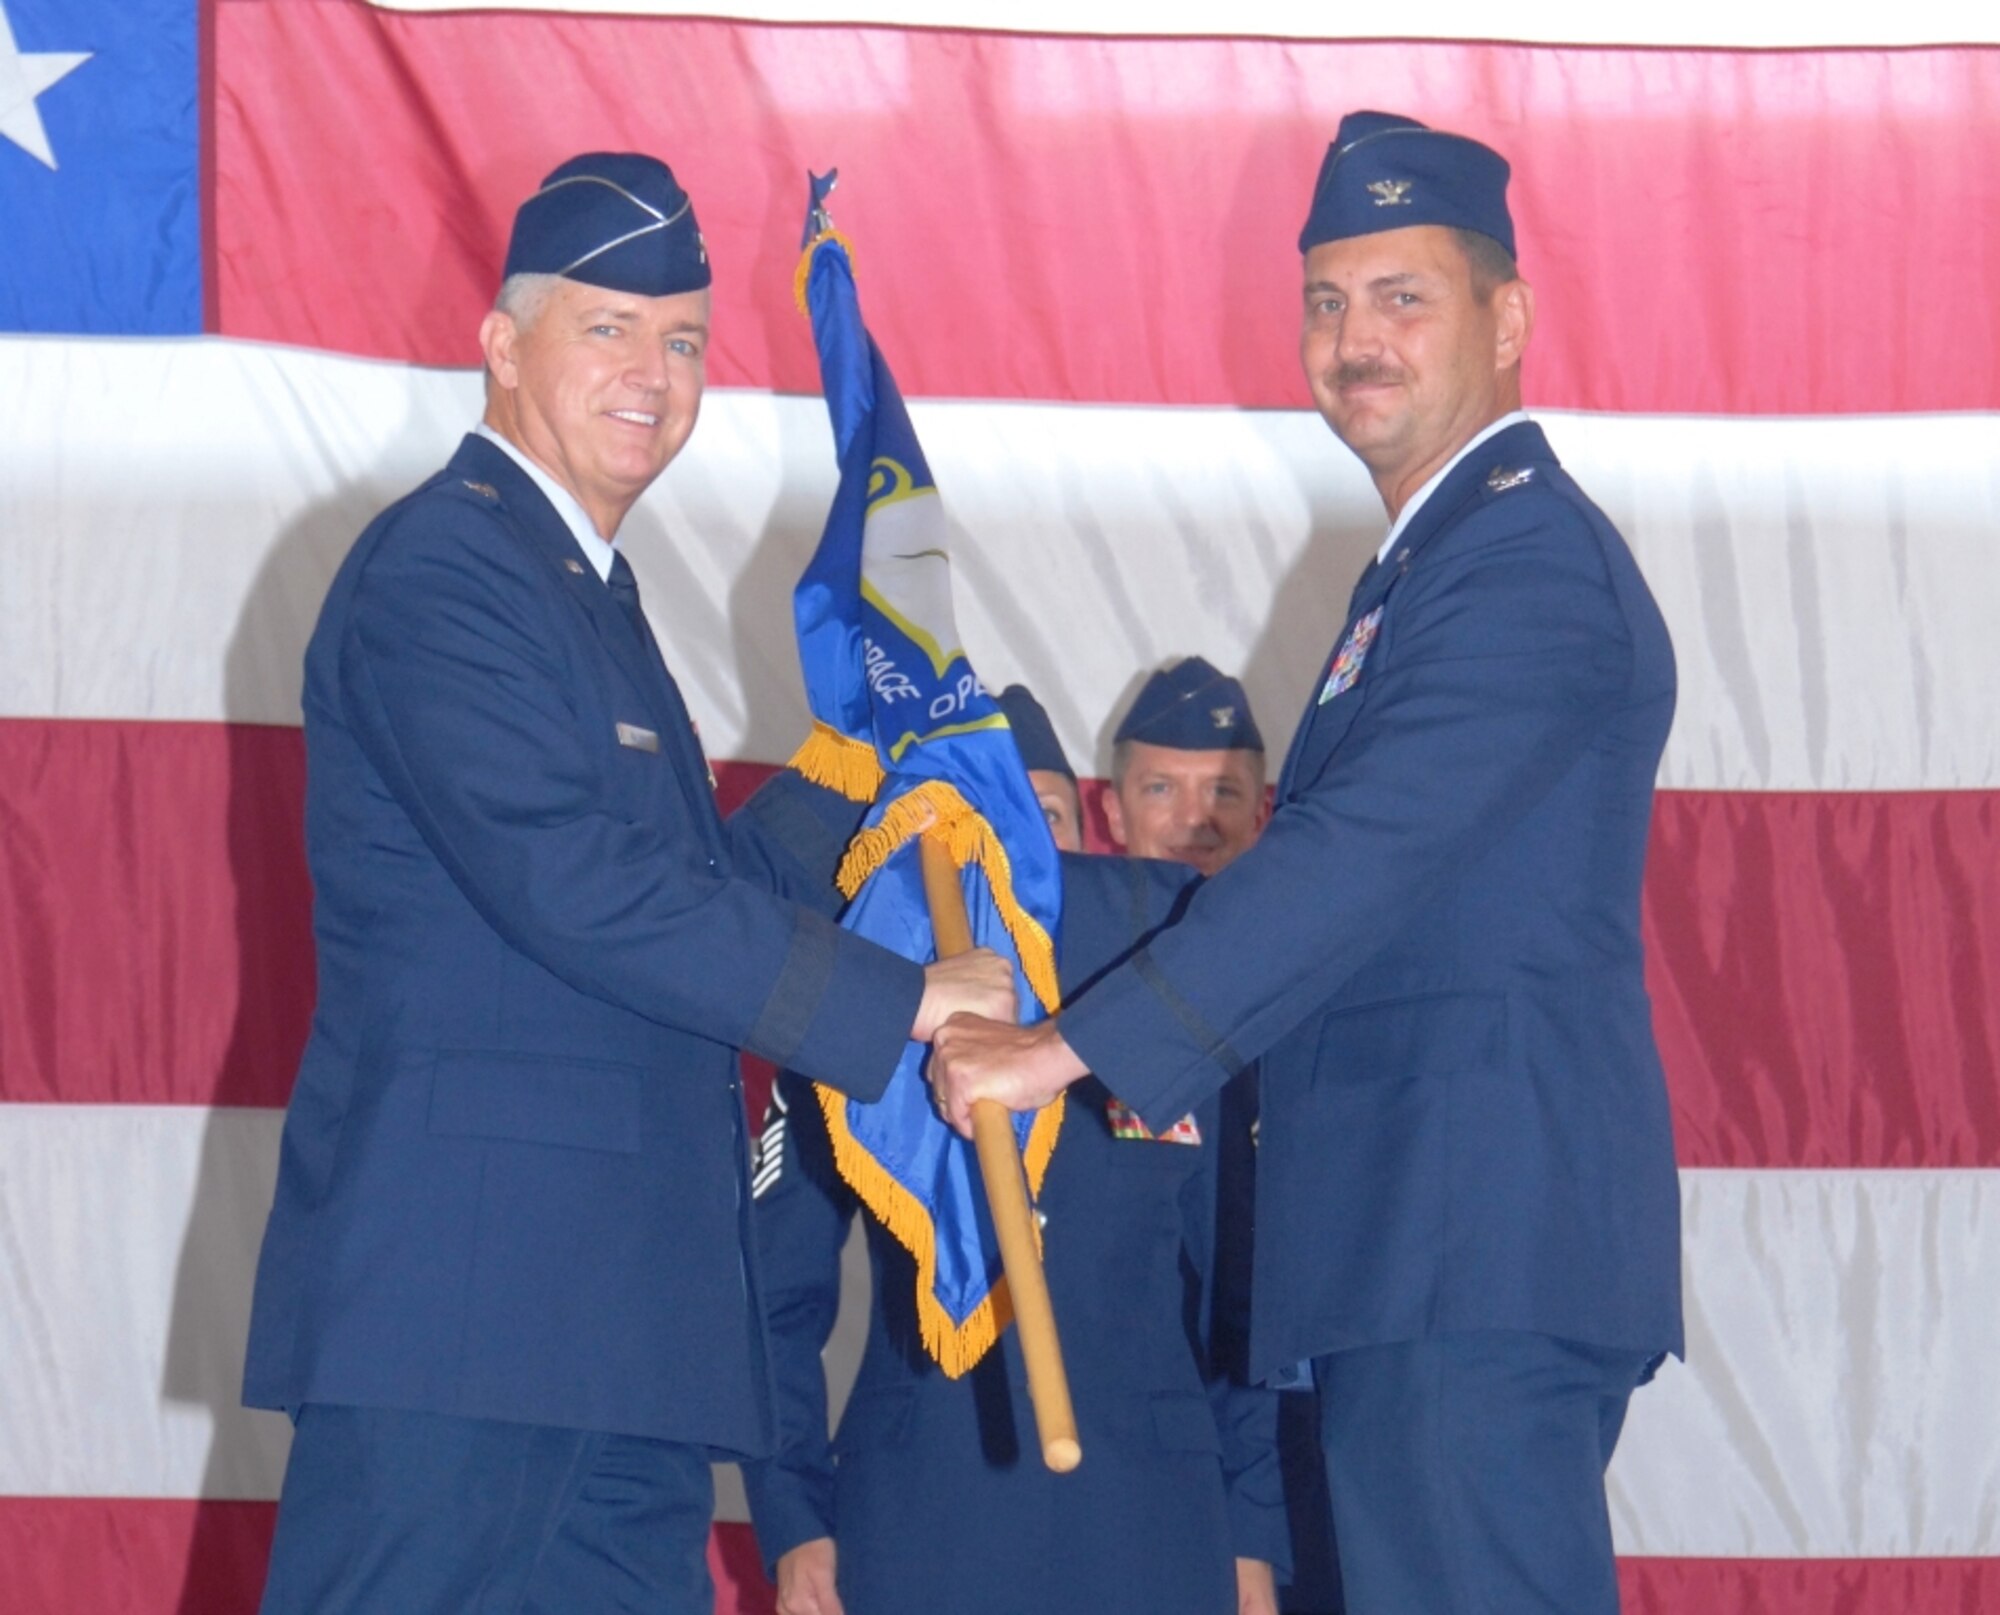 U.S. Air Force Brig. Gen. Joseph Balskus, left, receives the 101st Air & Space Operations Group (101st AOG) flag from Col. Scott Barberides as he relinquishes his command during a change of command ceremony held here June 11,2011. This was the very first change of command ceremony for the 101st AOG, which was officially activated July 1, 2009. Colonel Barberides served as the first commander of the 101st AOG. (U.S. Air Force photo by Maj. Steve Burke/Released)